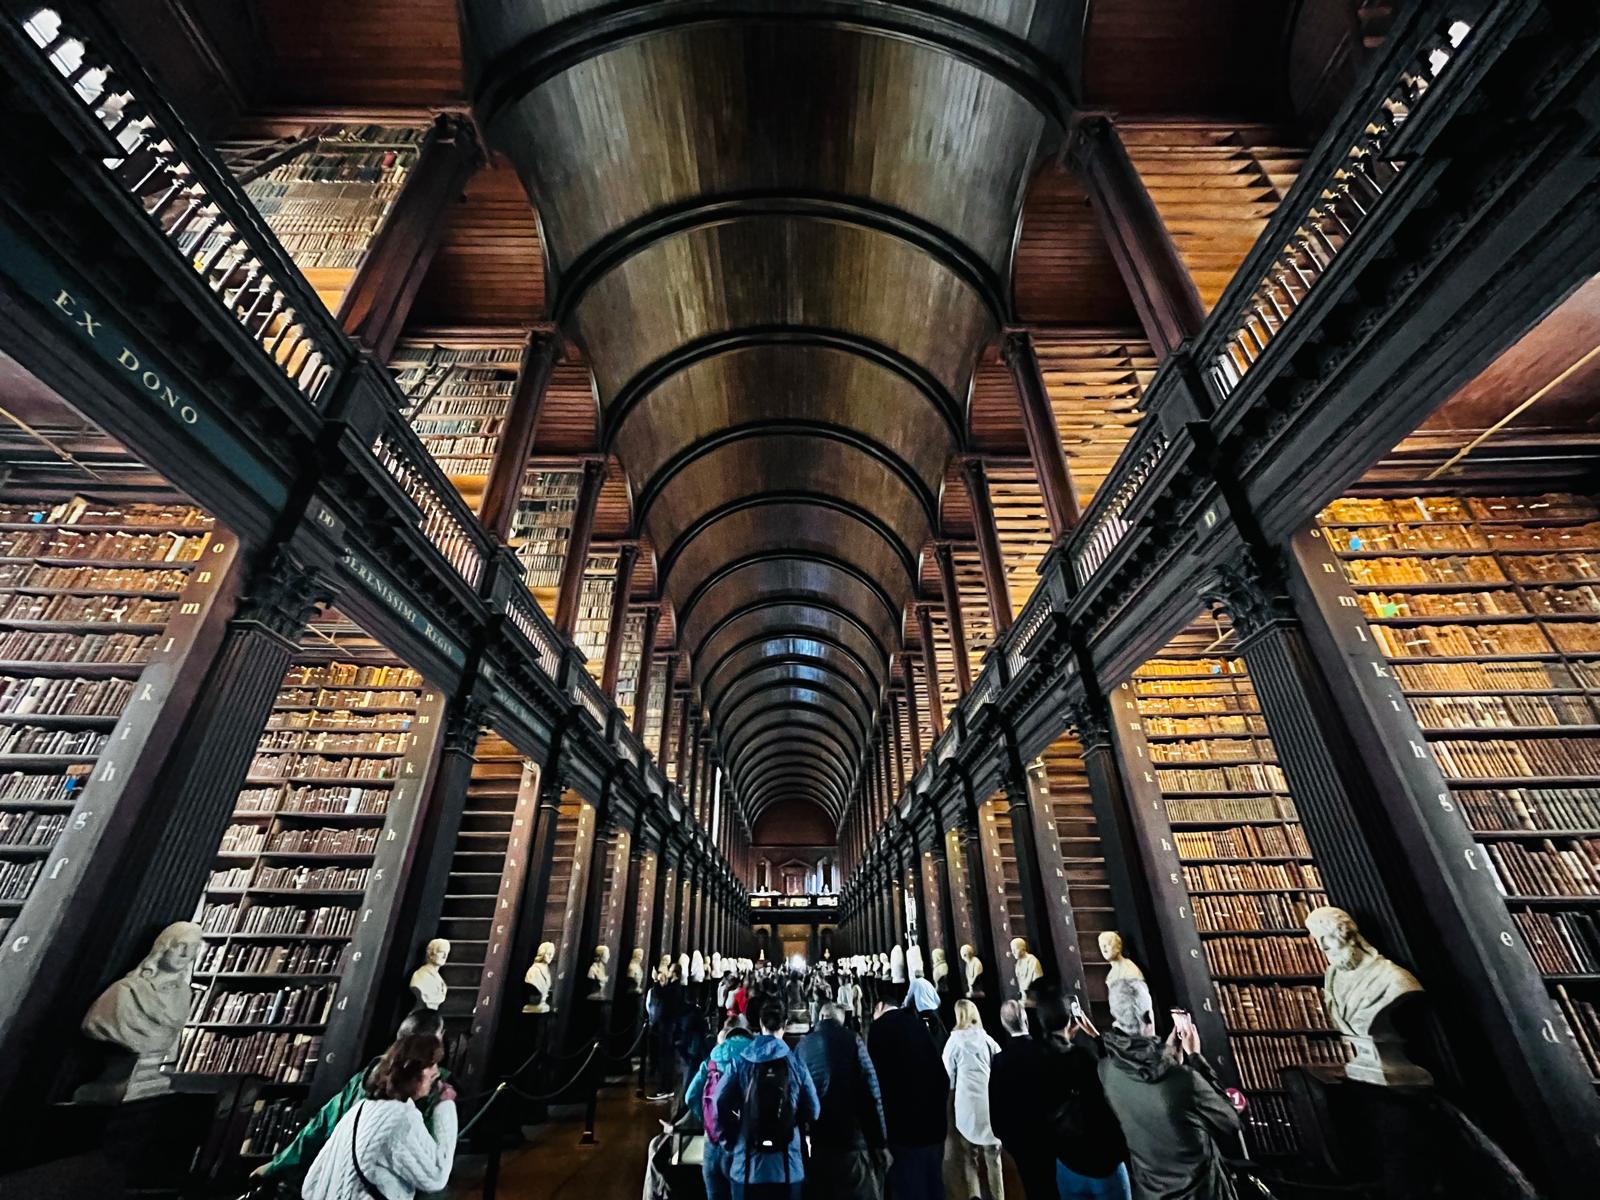 Visiting the Trinity College Library in Dublin is a good way to spend a rainy day (photo: stock photo license).